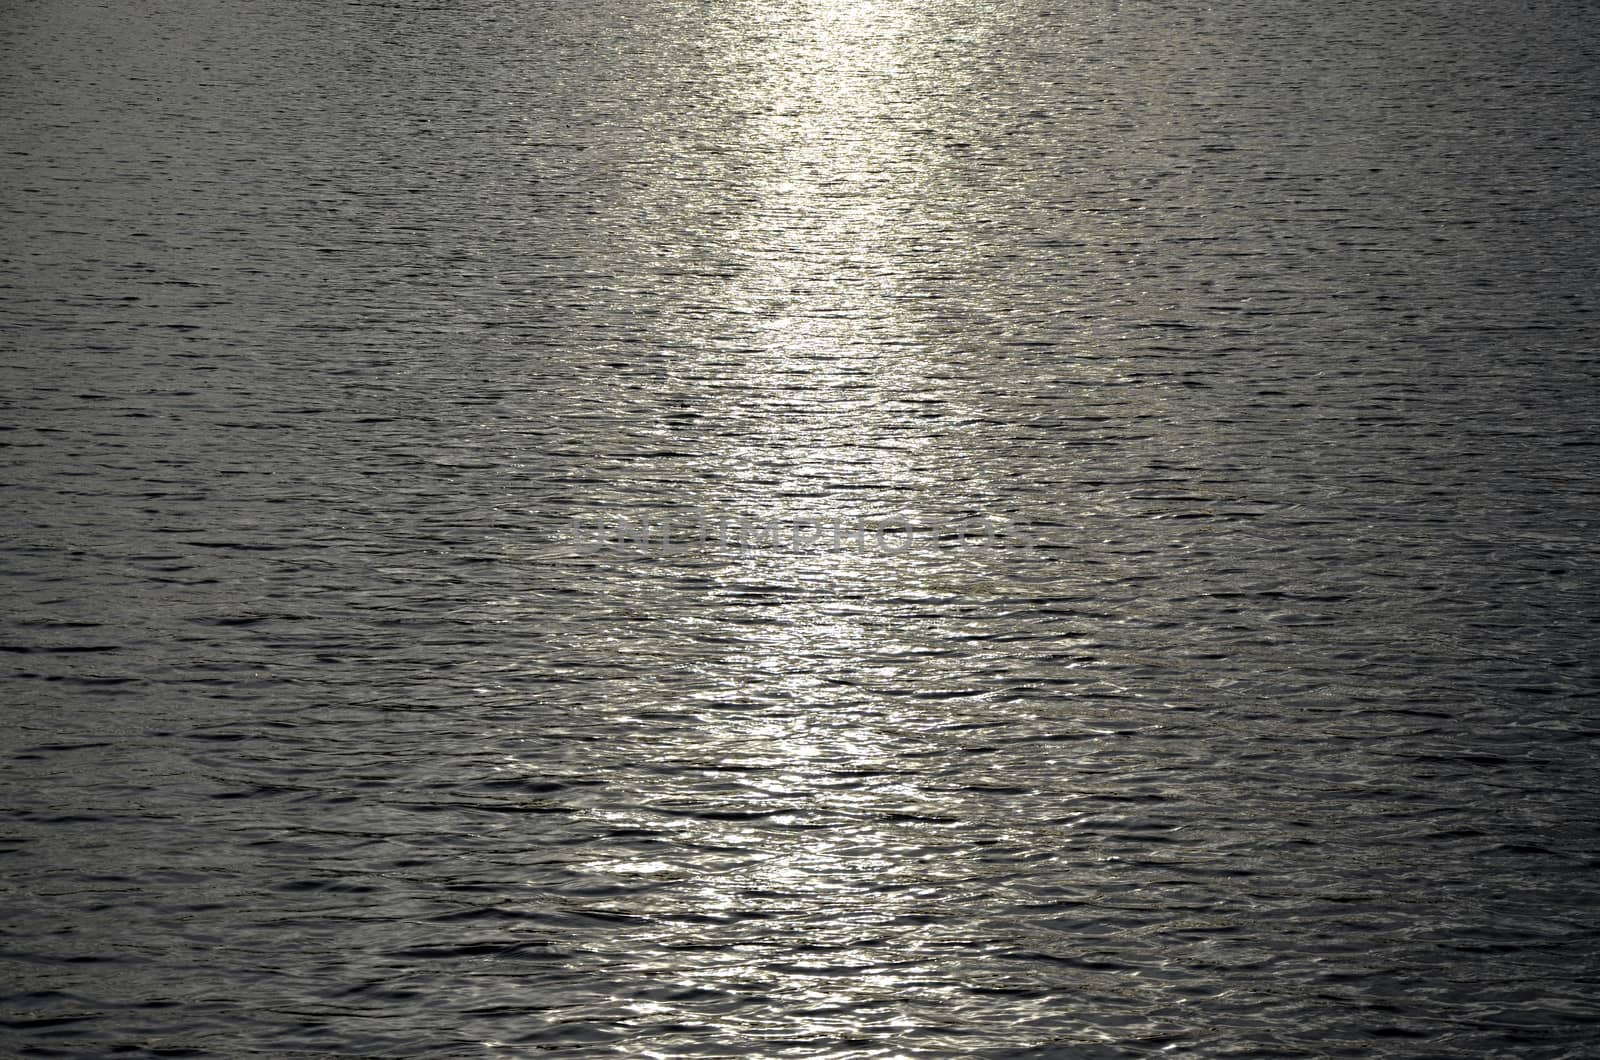  The reflection of the light of the sun on the water surface of the lake